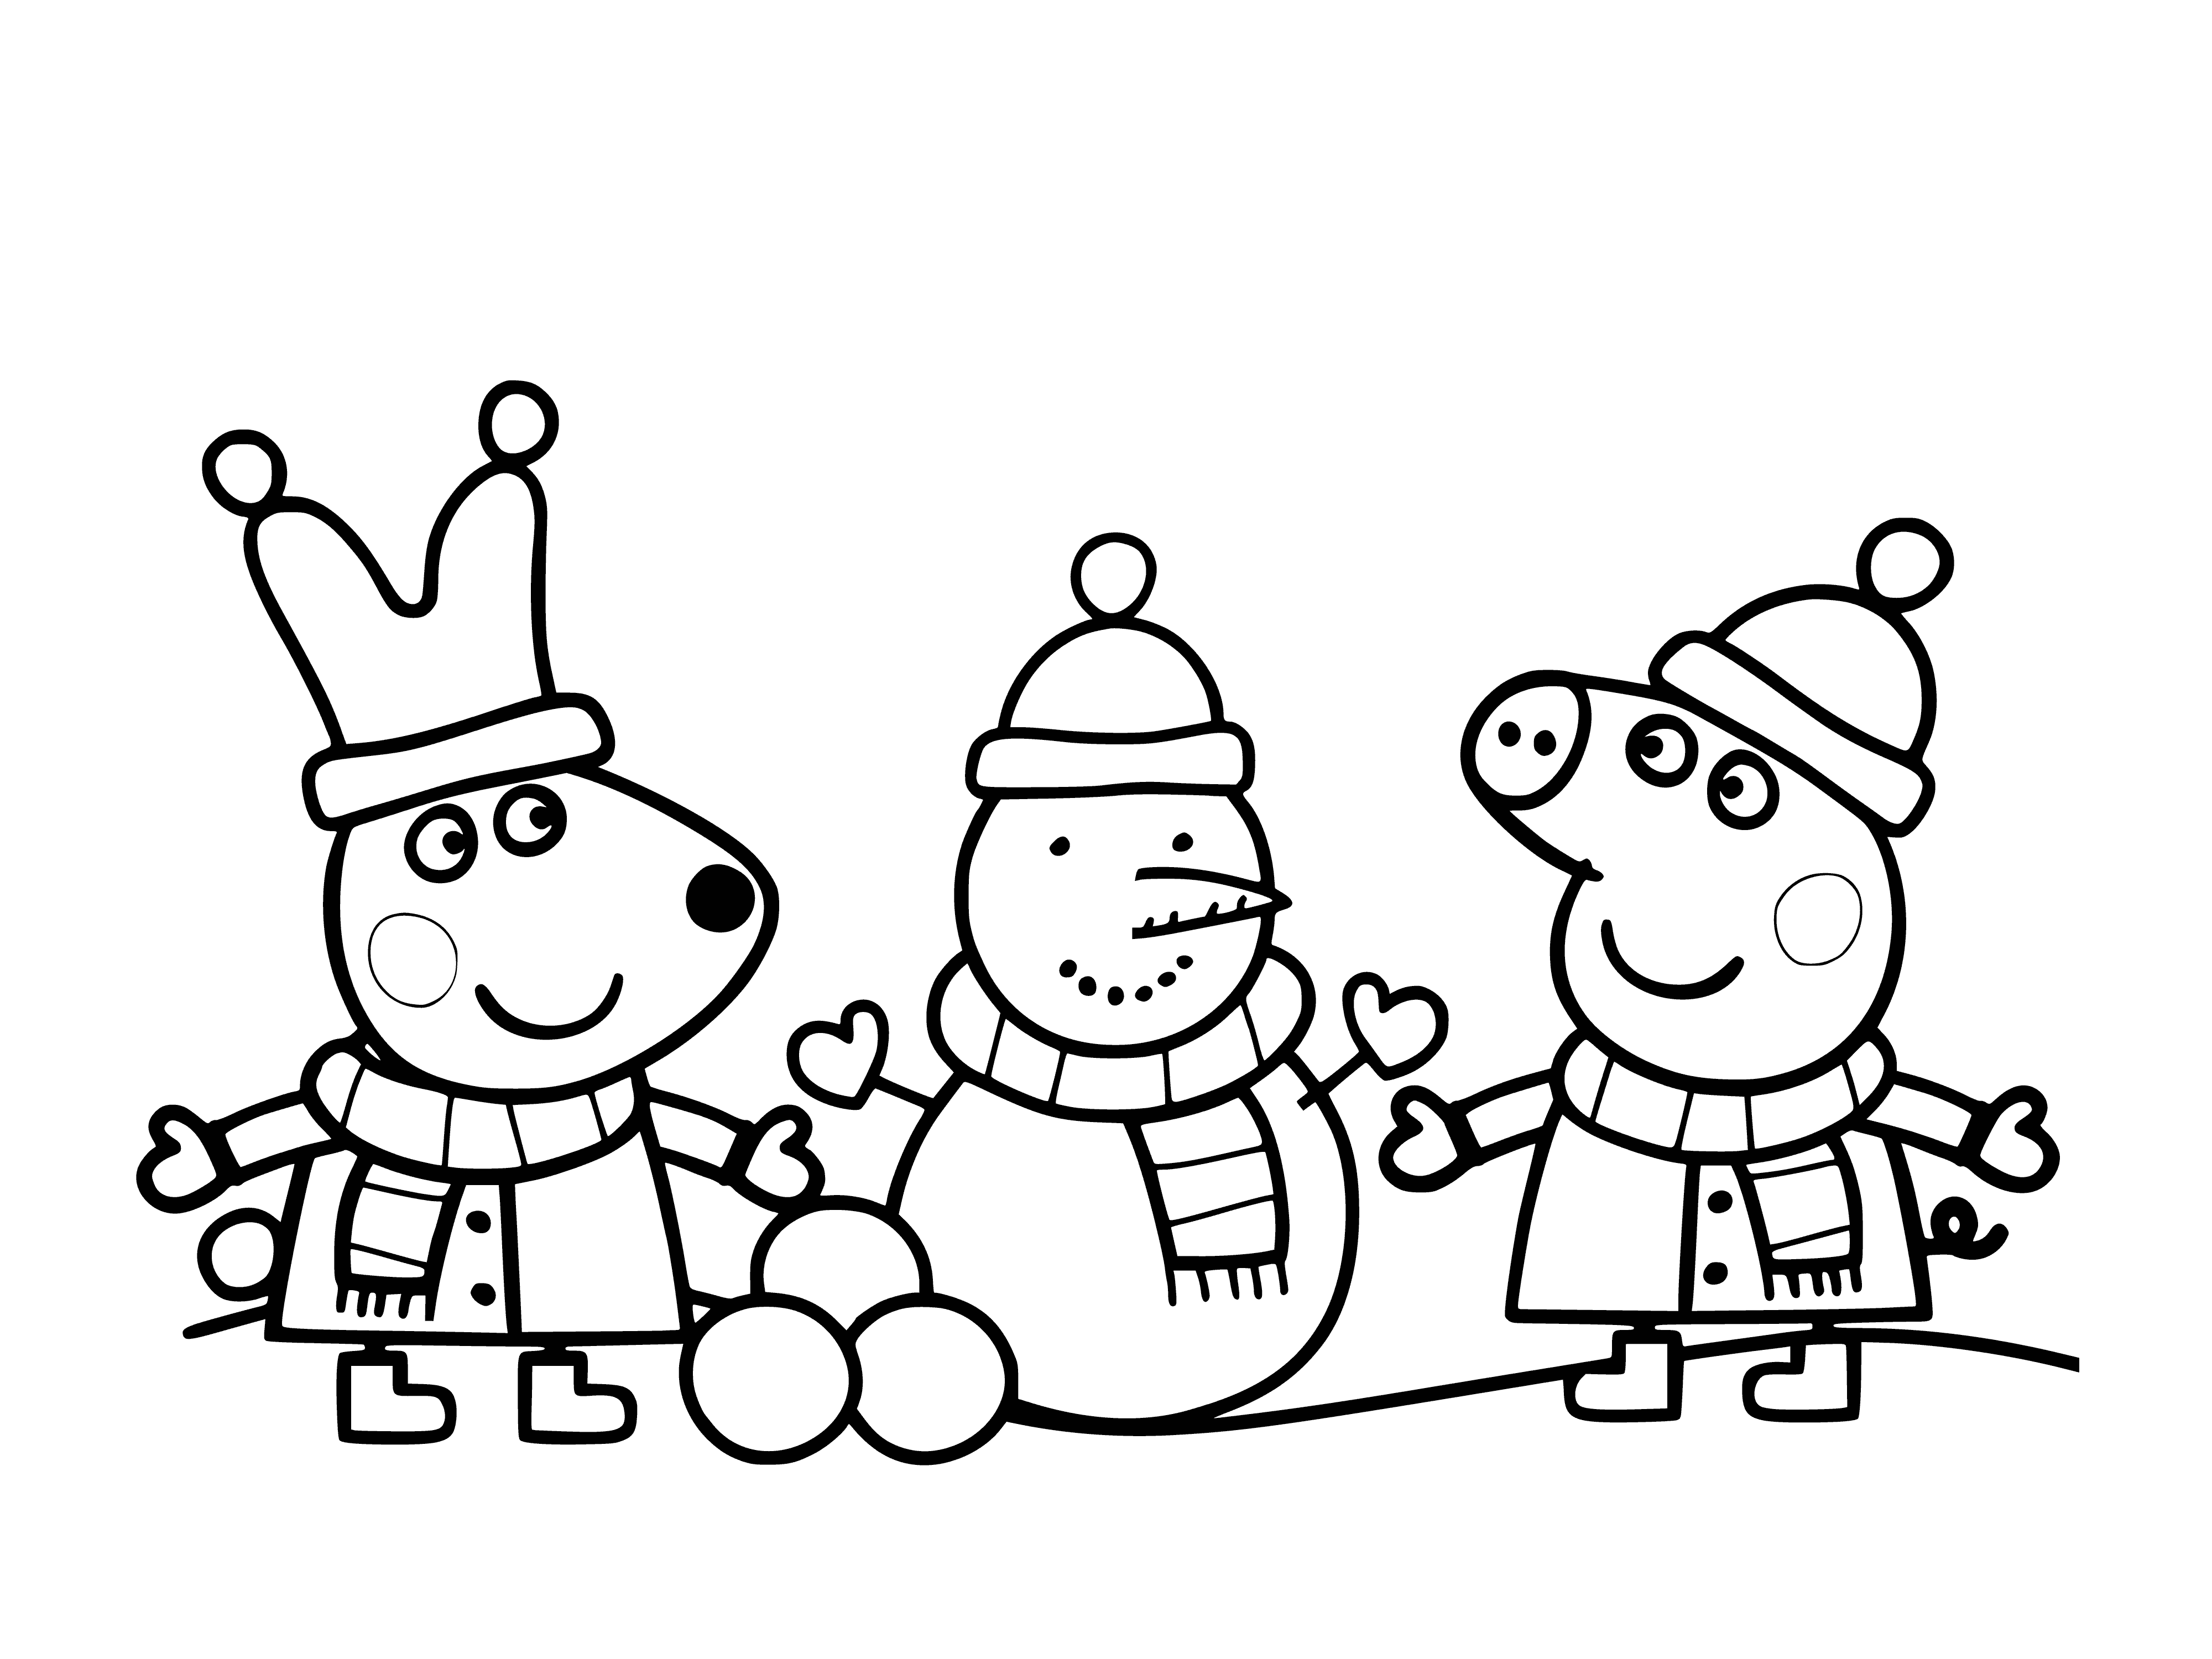 Peppa Pig and Rebecca the Rabbit Make a Snowman coloring page